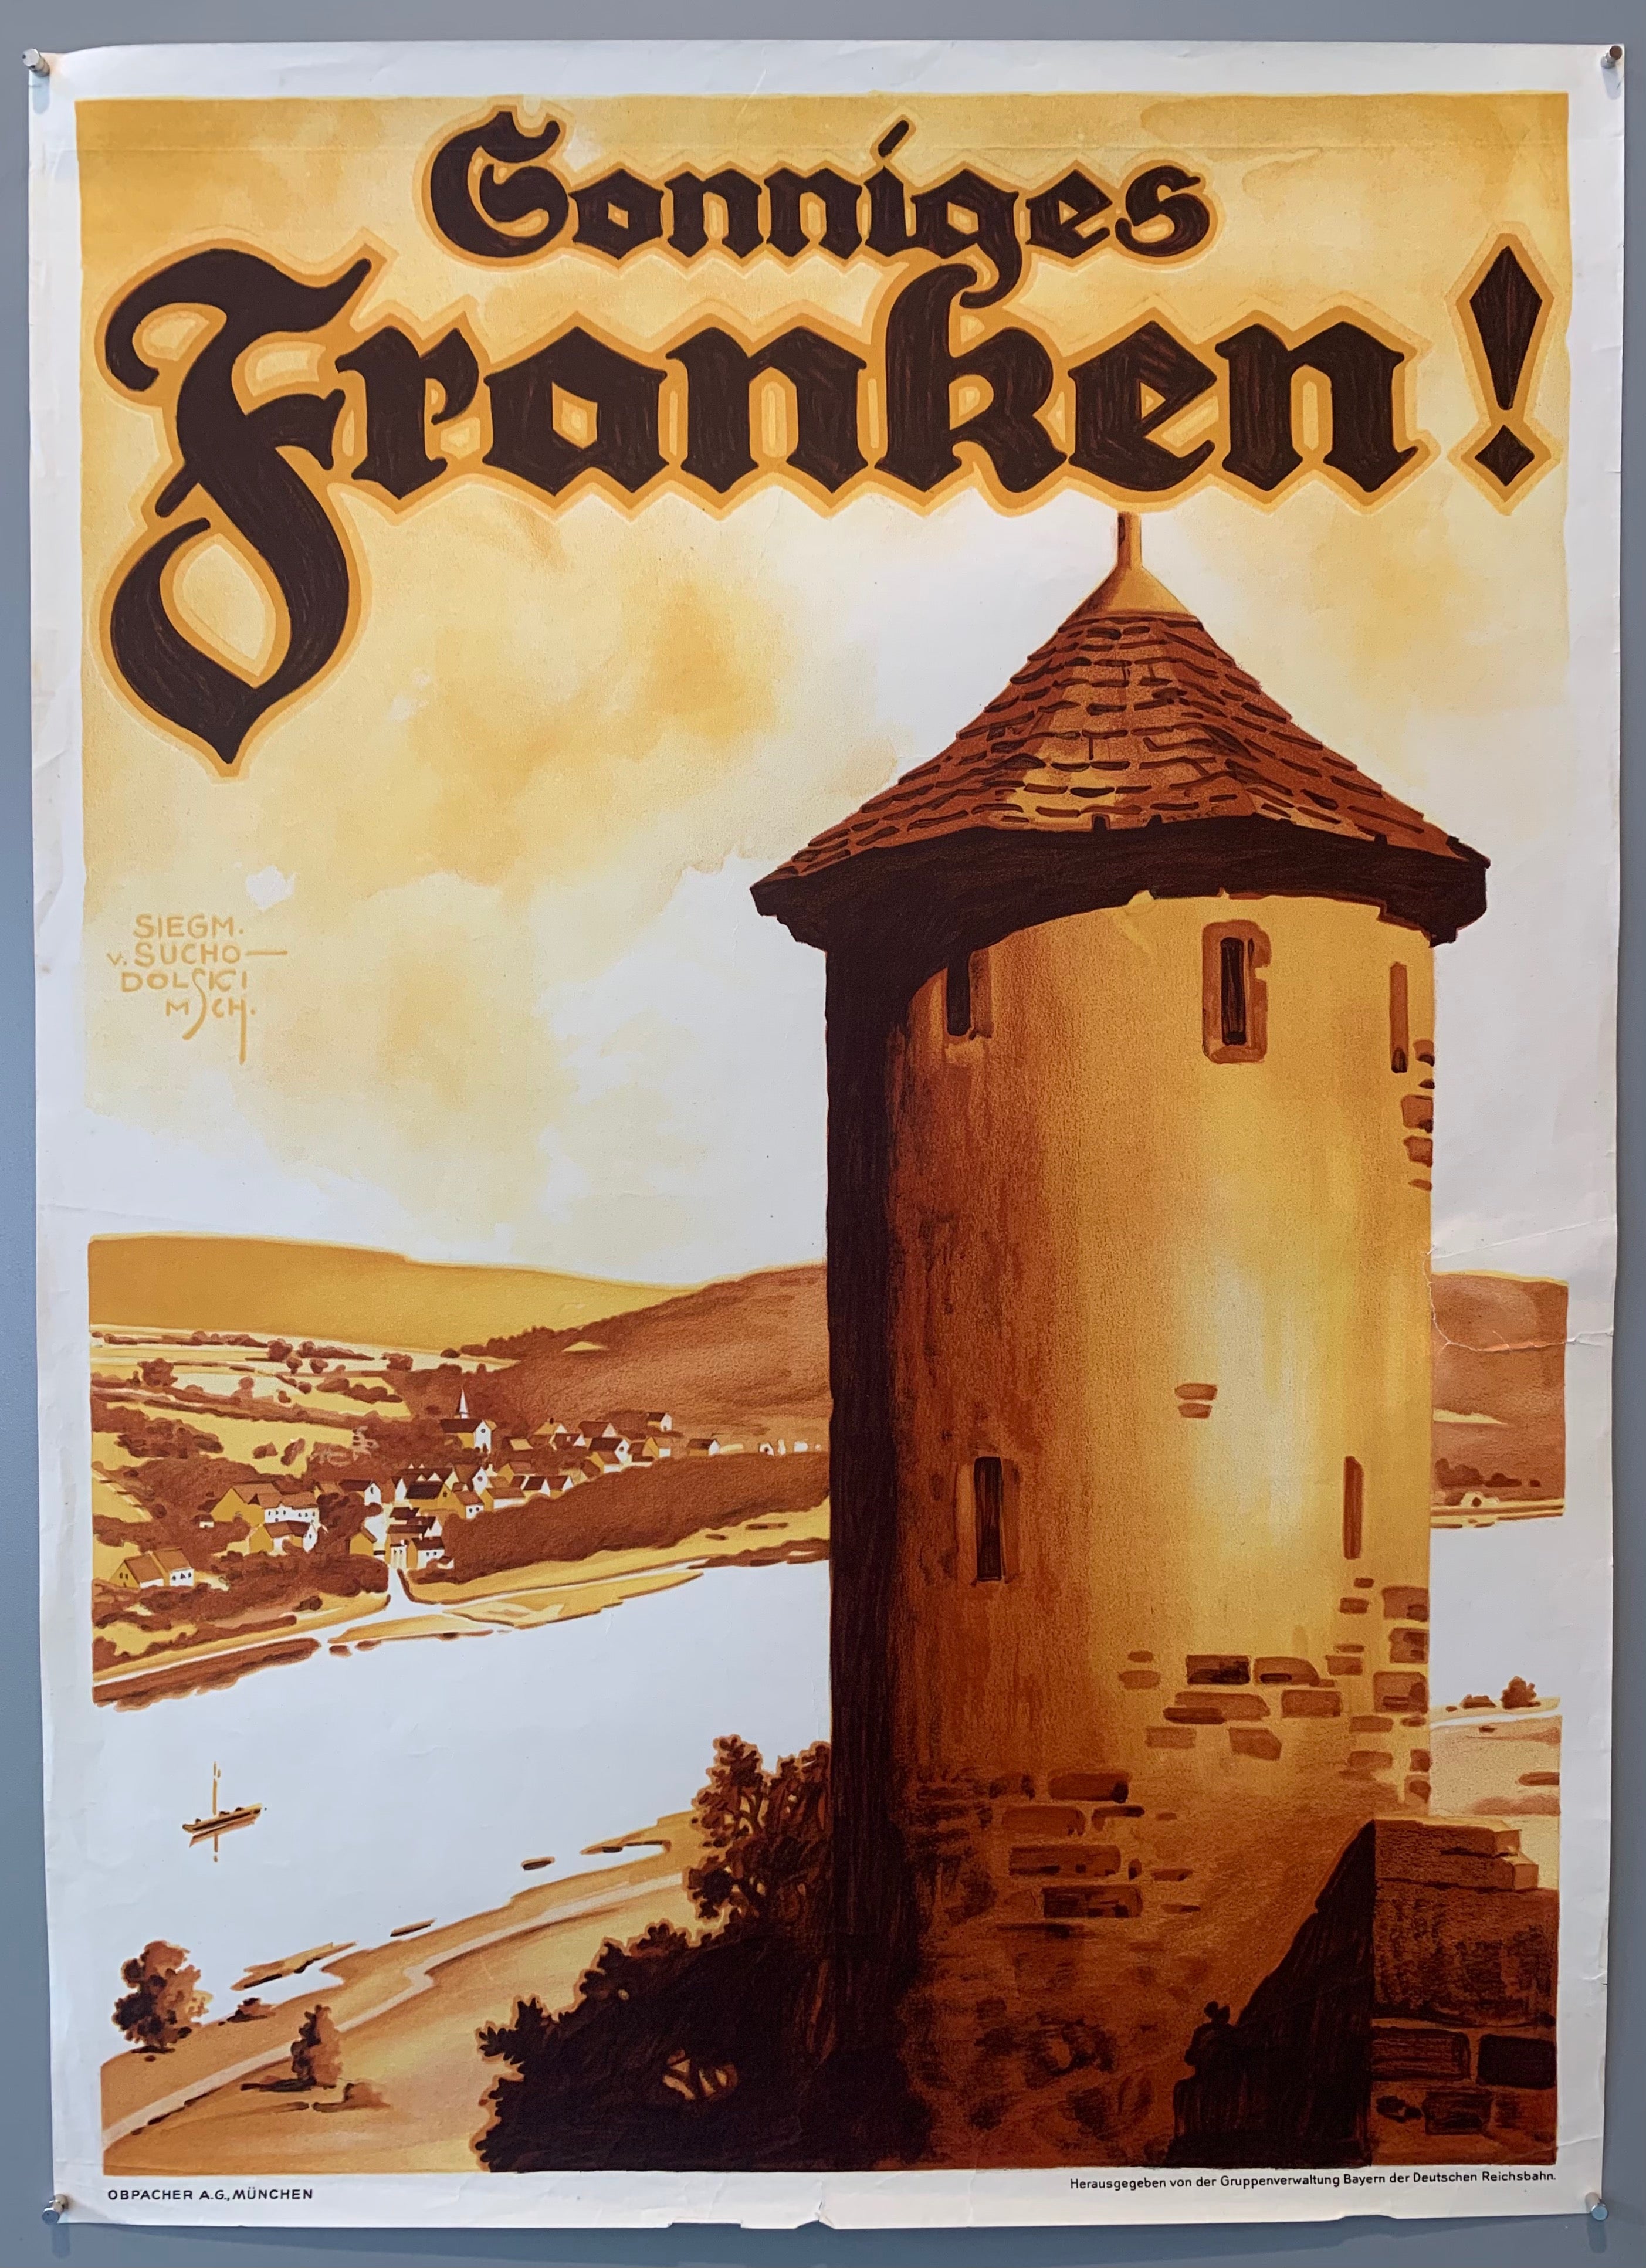 Siegmund von Suchodolski was a German painter, architect and commercial artist. He made many posters for advertisements and travel, amongst children's books and illustrating various publications. This poster shows a Franconian tower overlooking a river with a town in the background. Poster has muted sepia tones.